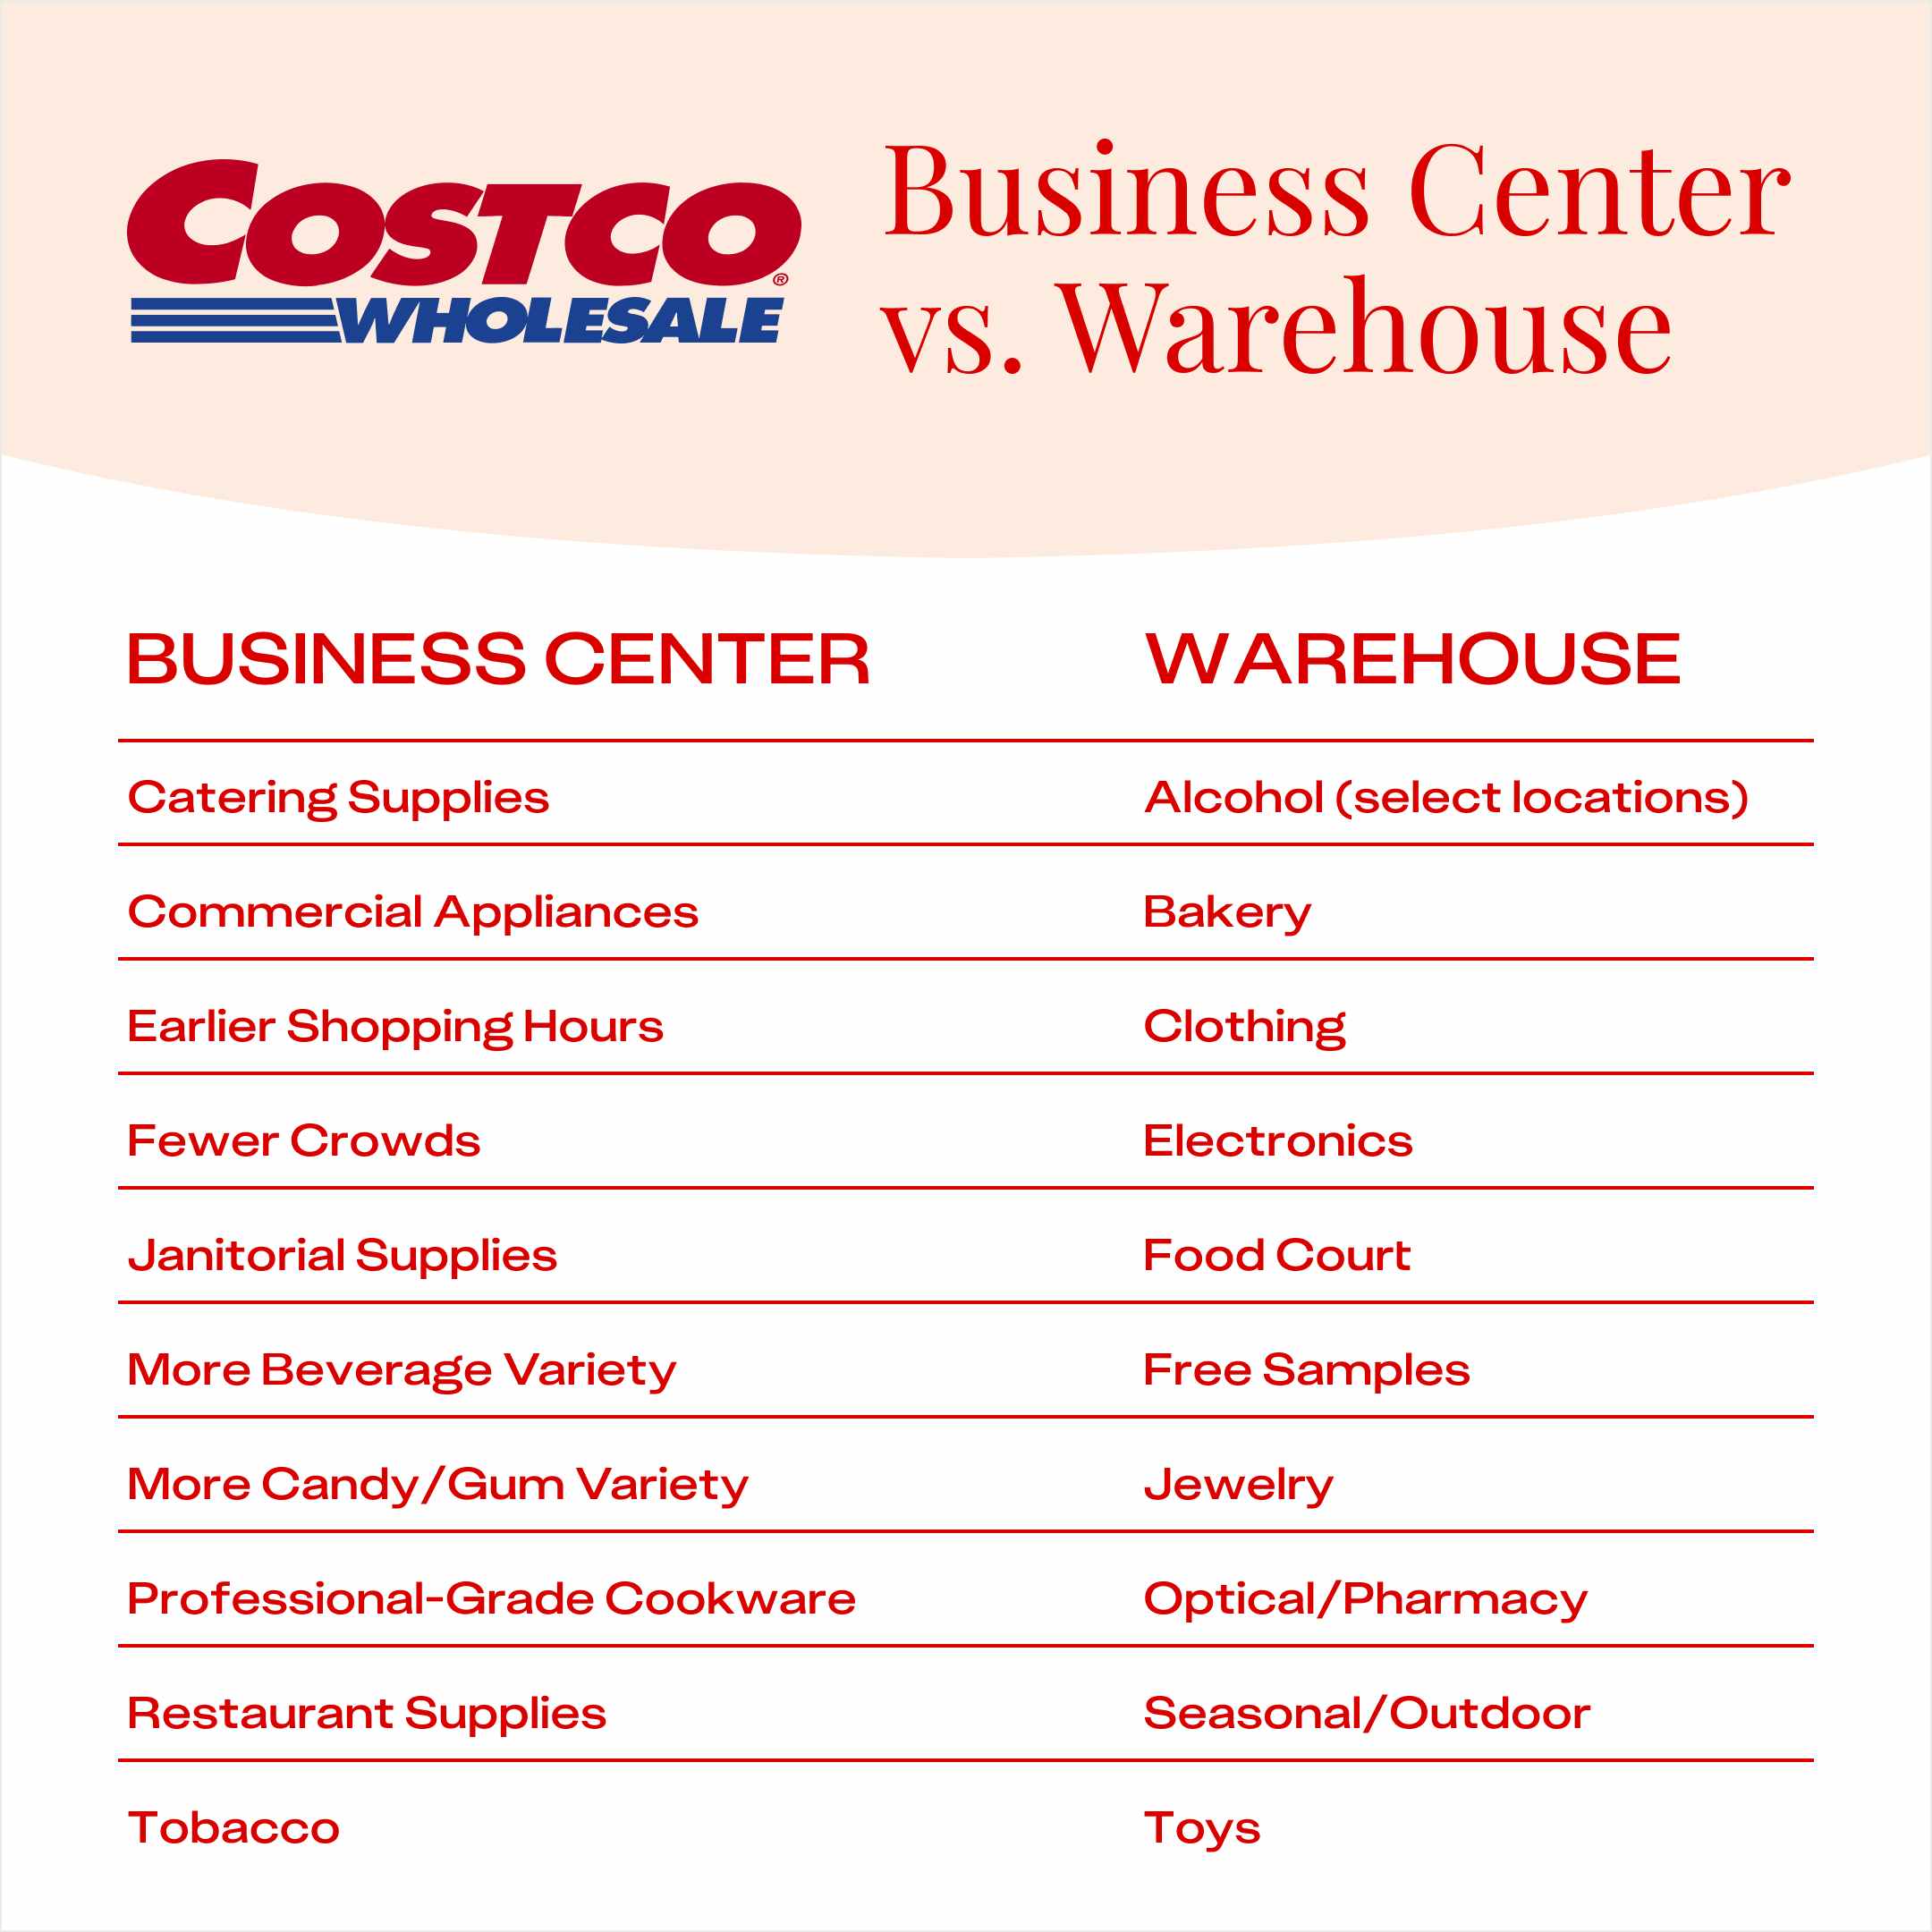 Differences between a Costco Business Center and a regular Costco warehouse